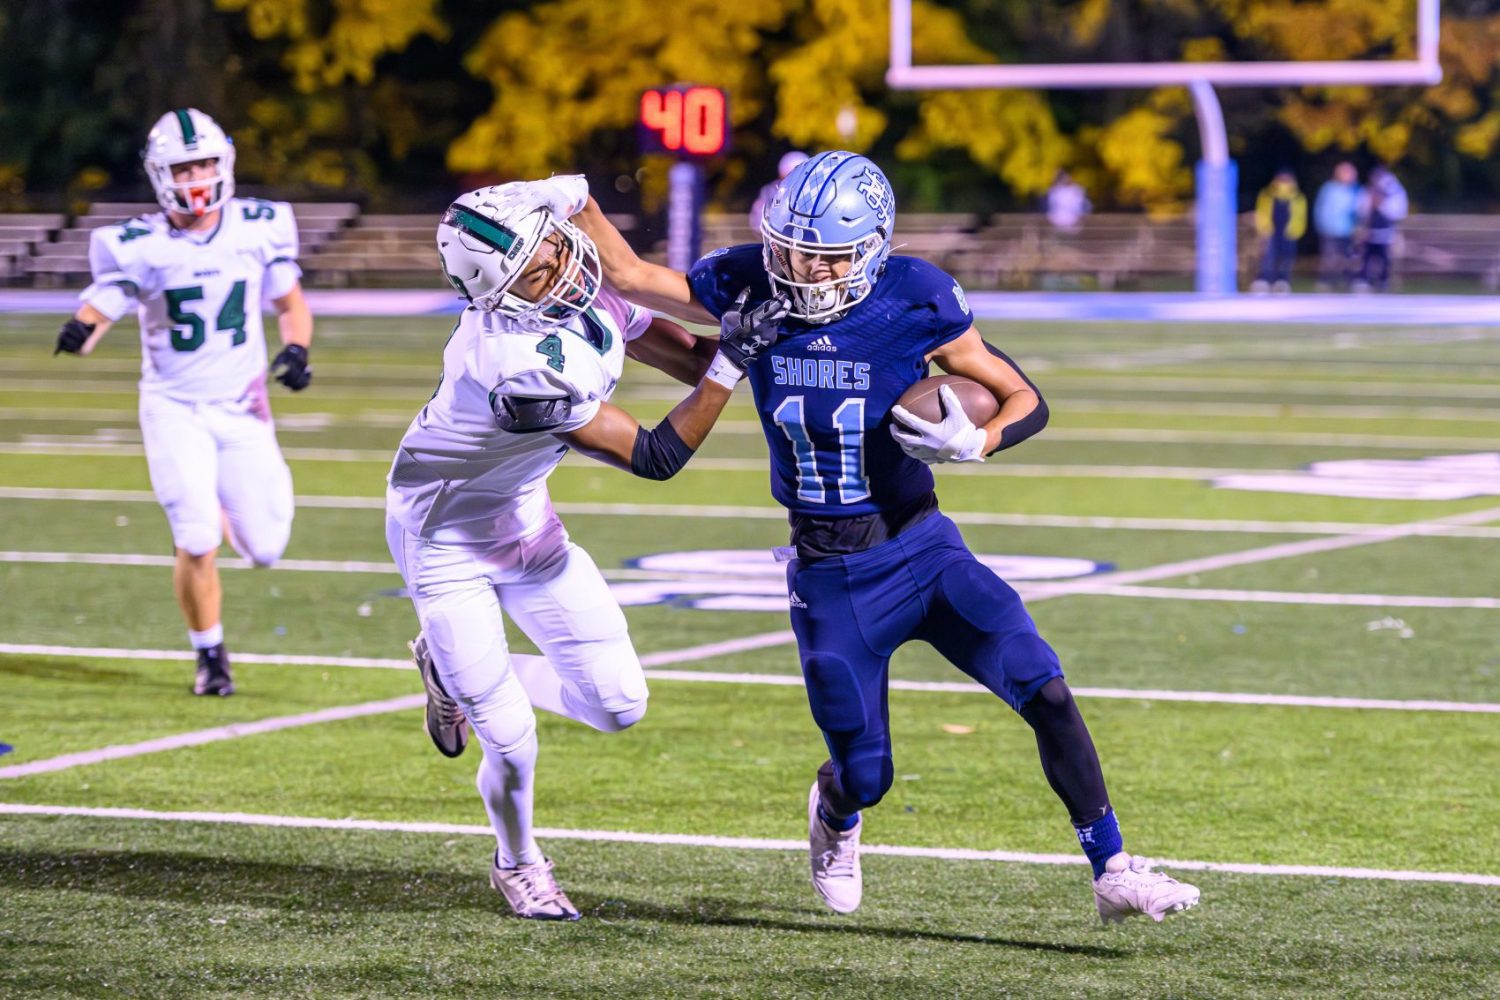 Mona Shores shows off its power in playoff victory over rival Reeths-Puffer